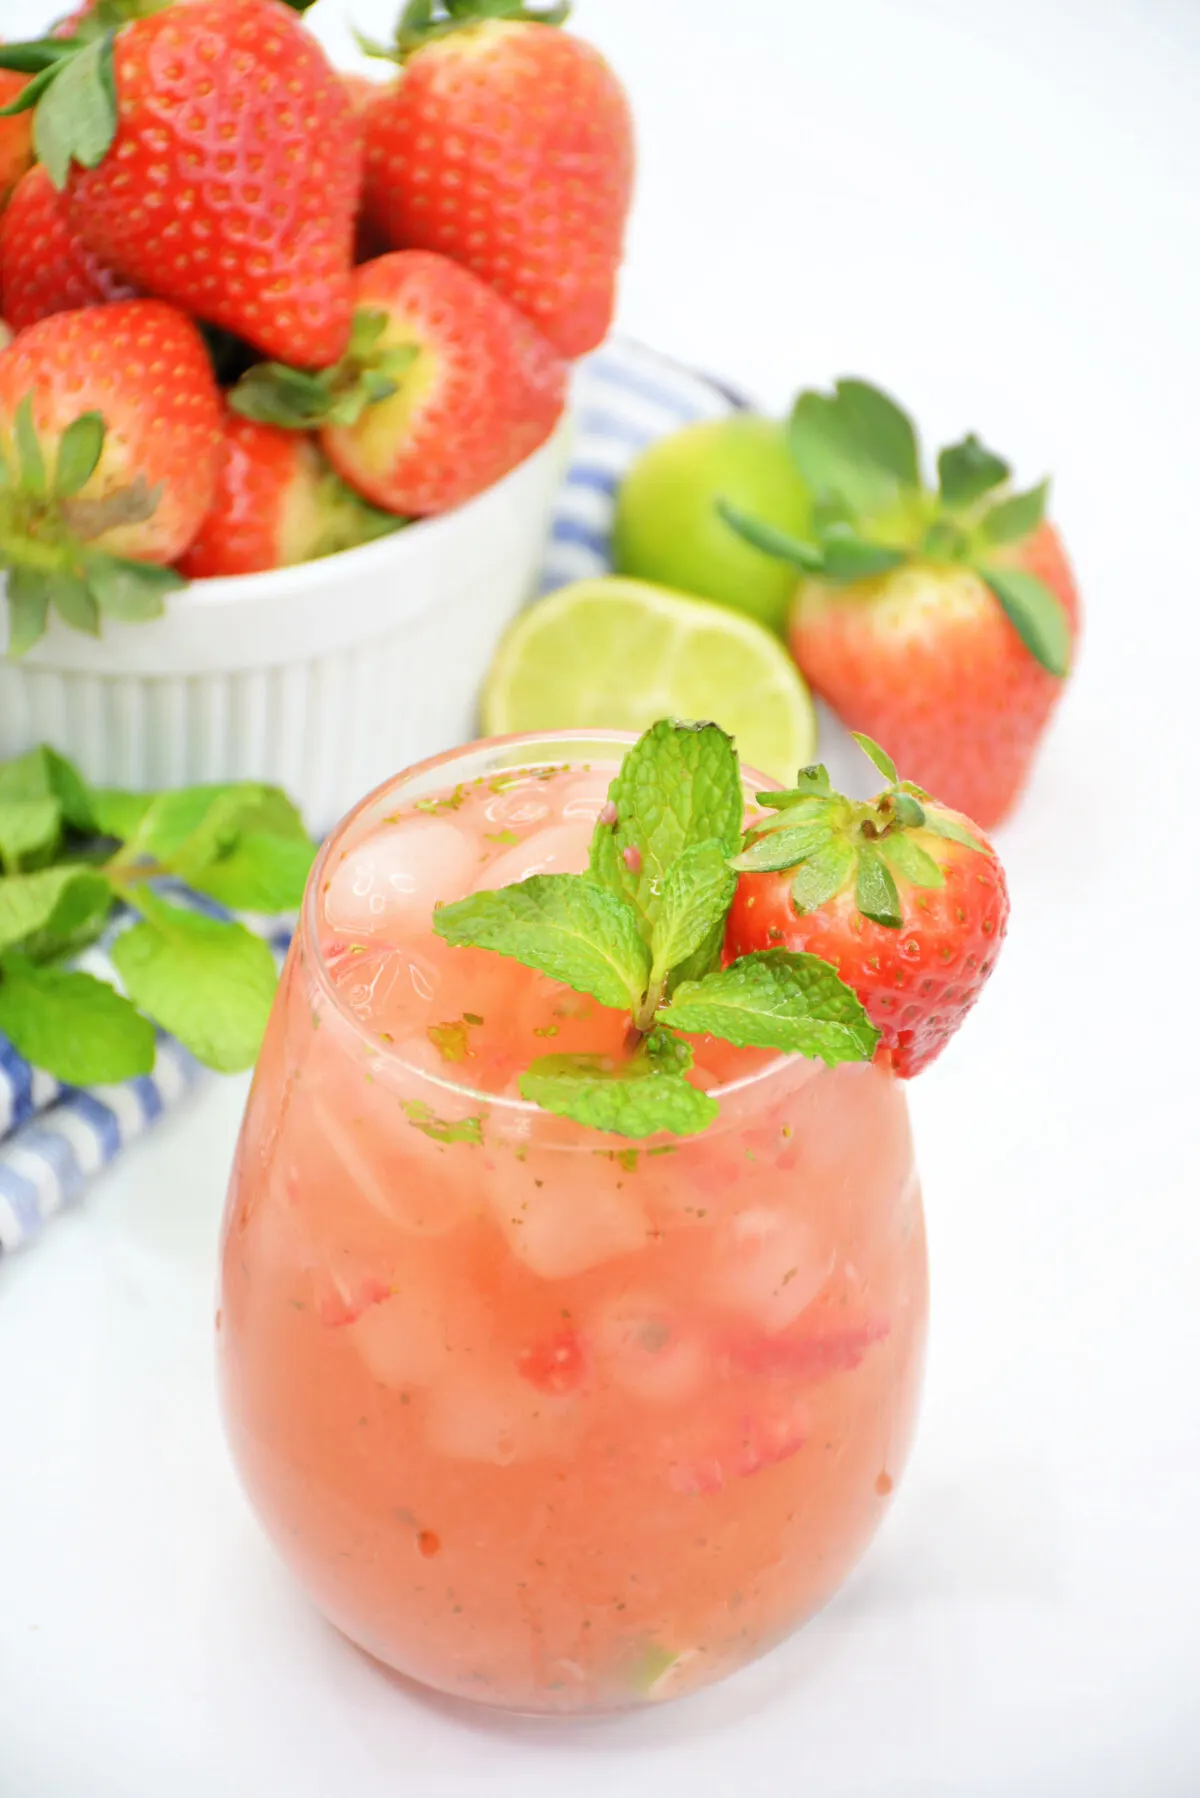 Looking for a refreshing drink to enjoy this summer? Try this tasty strawberry mango mojito recipe and make it the star of your next party!